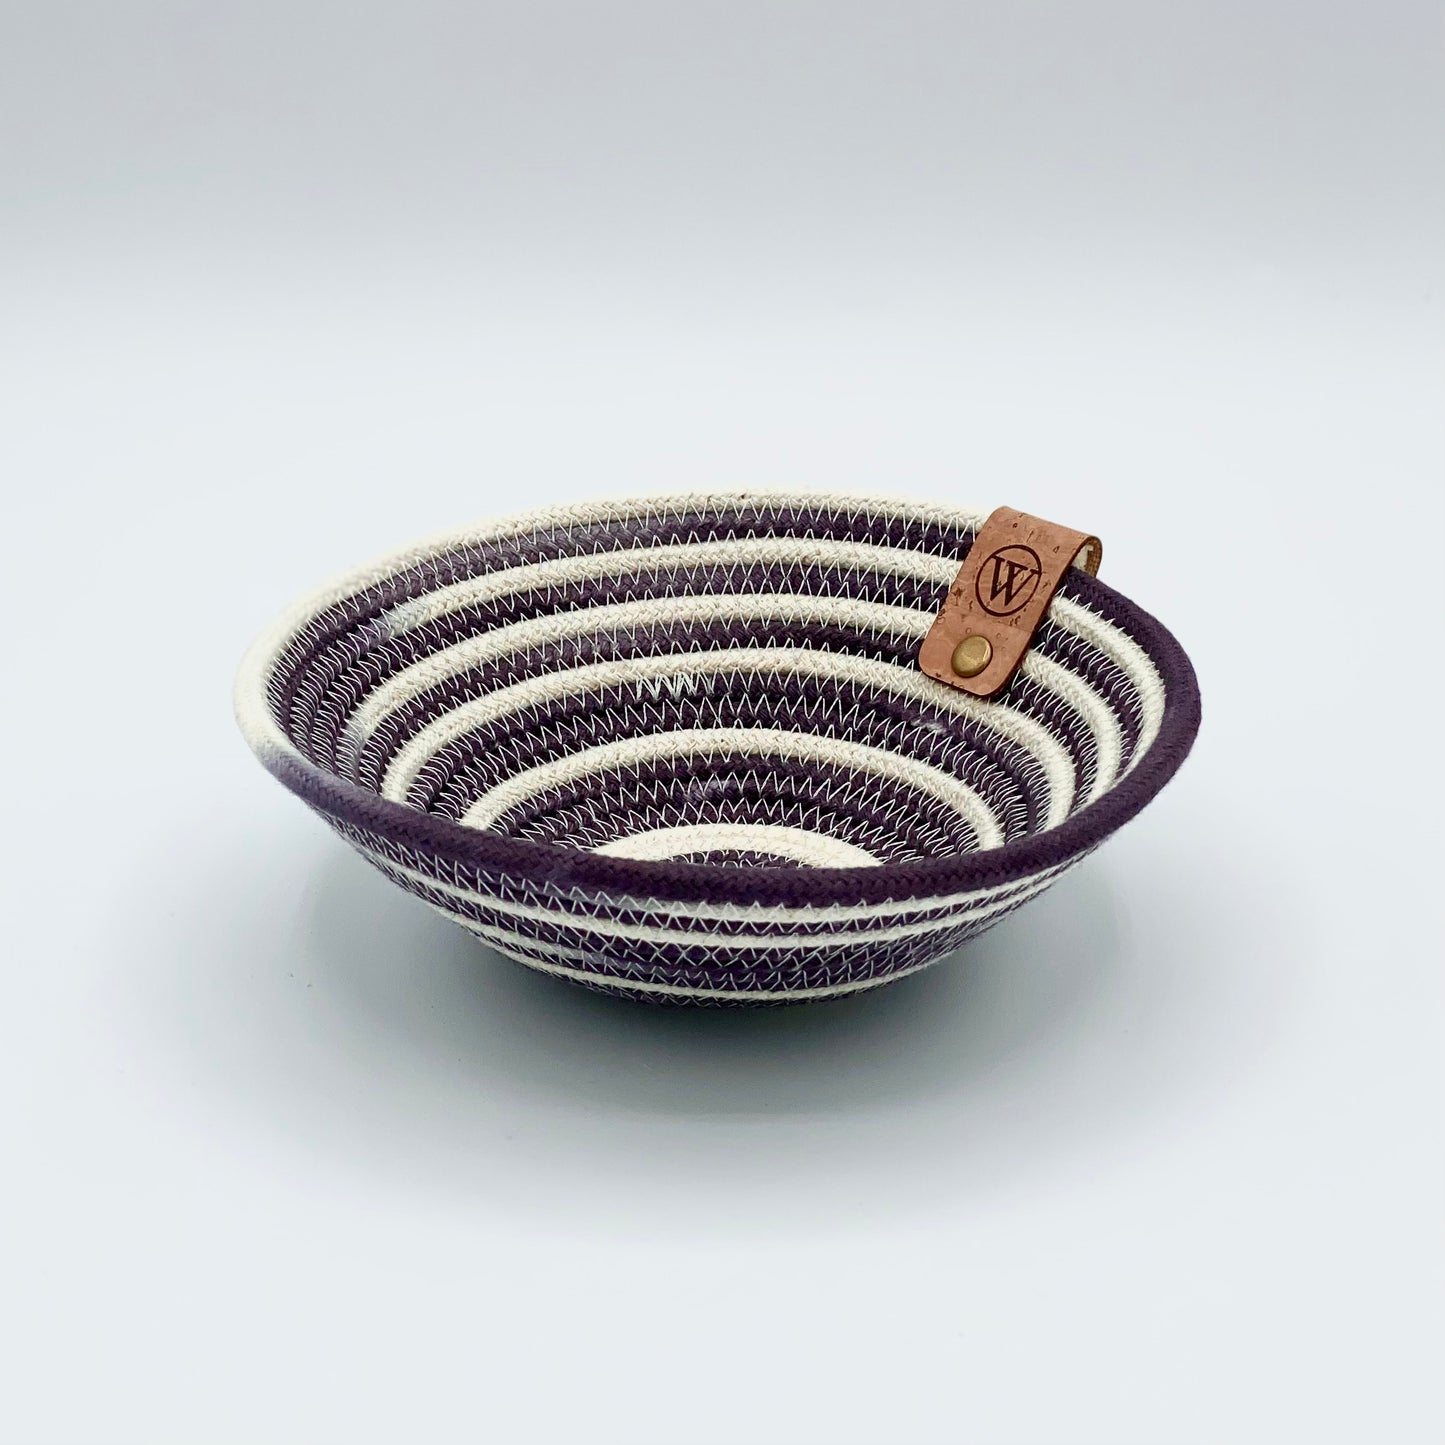 Trinket Bowl by Warm, Wooly & Woven